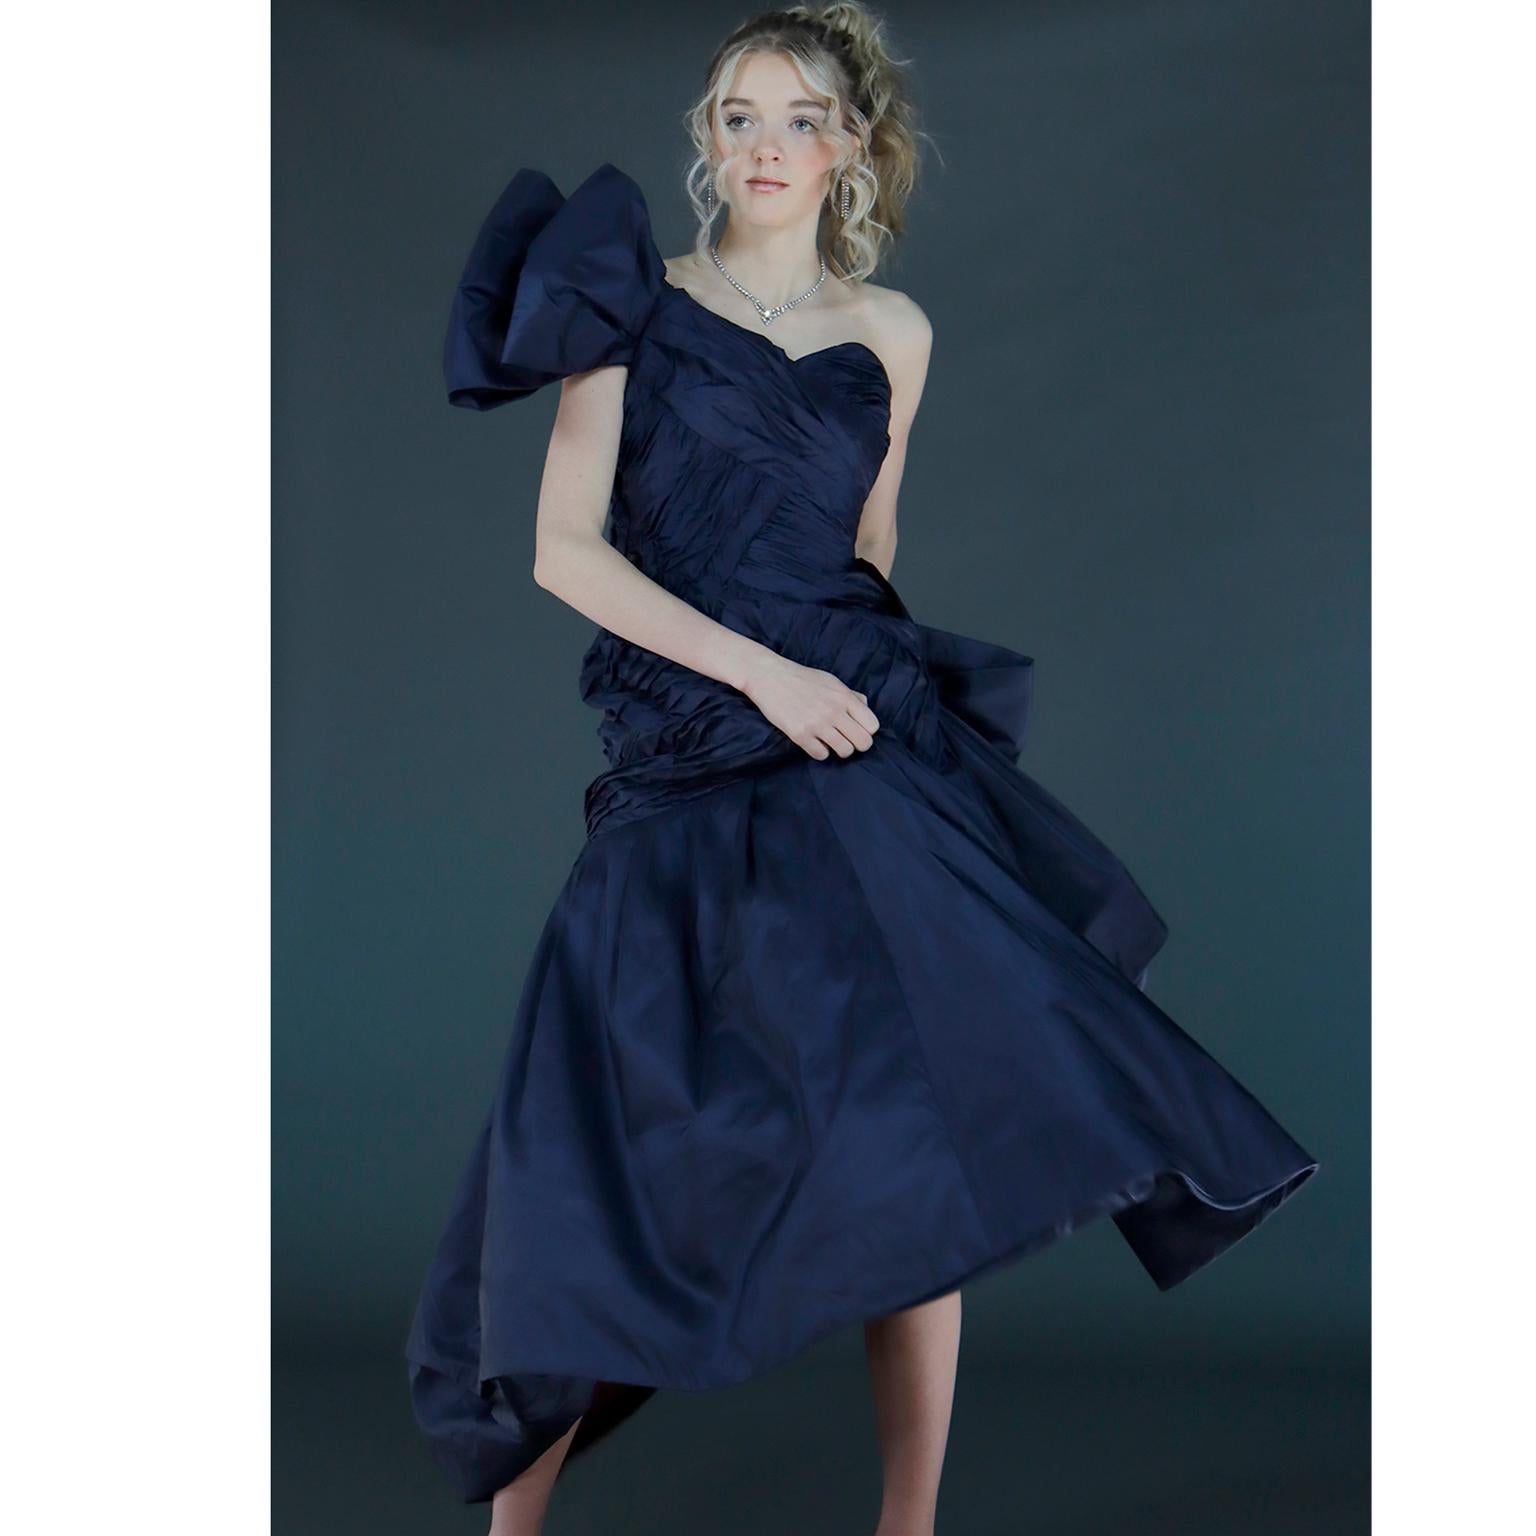 This is a stunning Scaasi Boutique 1980's vintage blue silk taffeta one shoulder evening gown. The high low silhouette, bows and unique criss cross pleating make this dress an incredible piece to add to any wardrobe or collection. The sheath upper